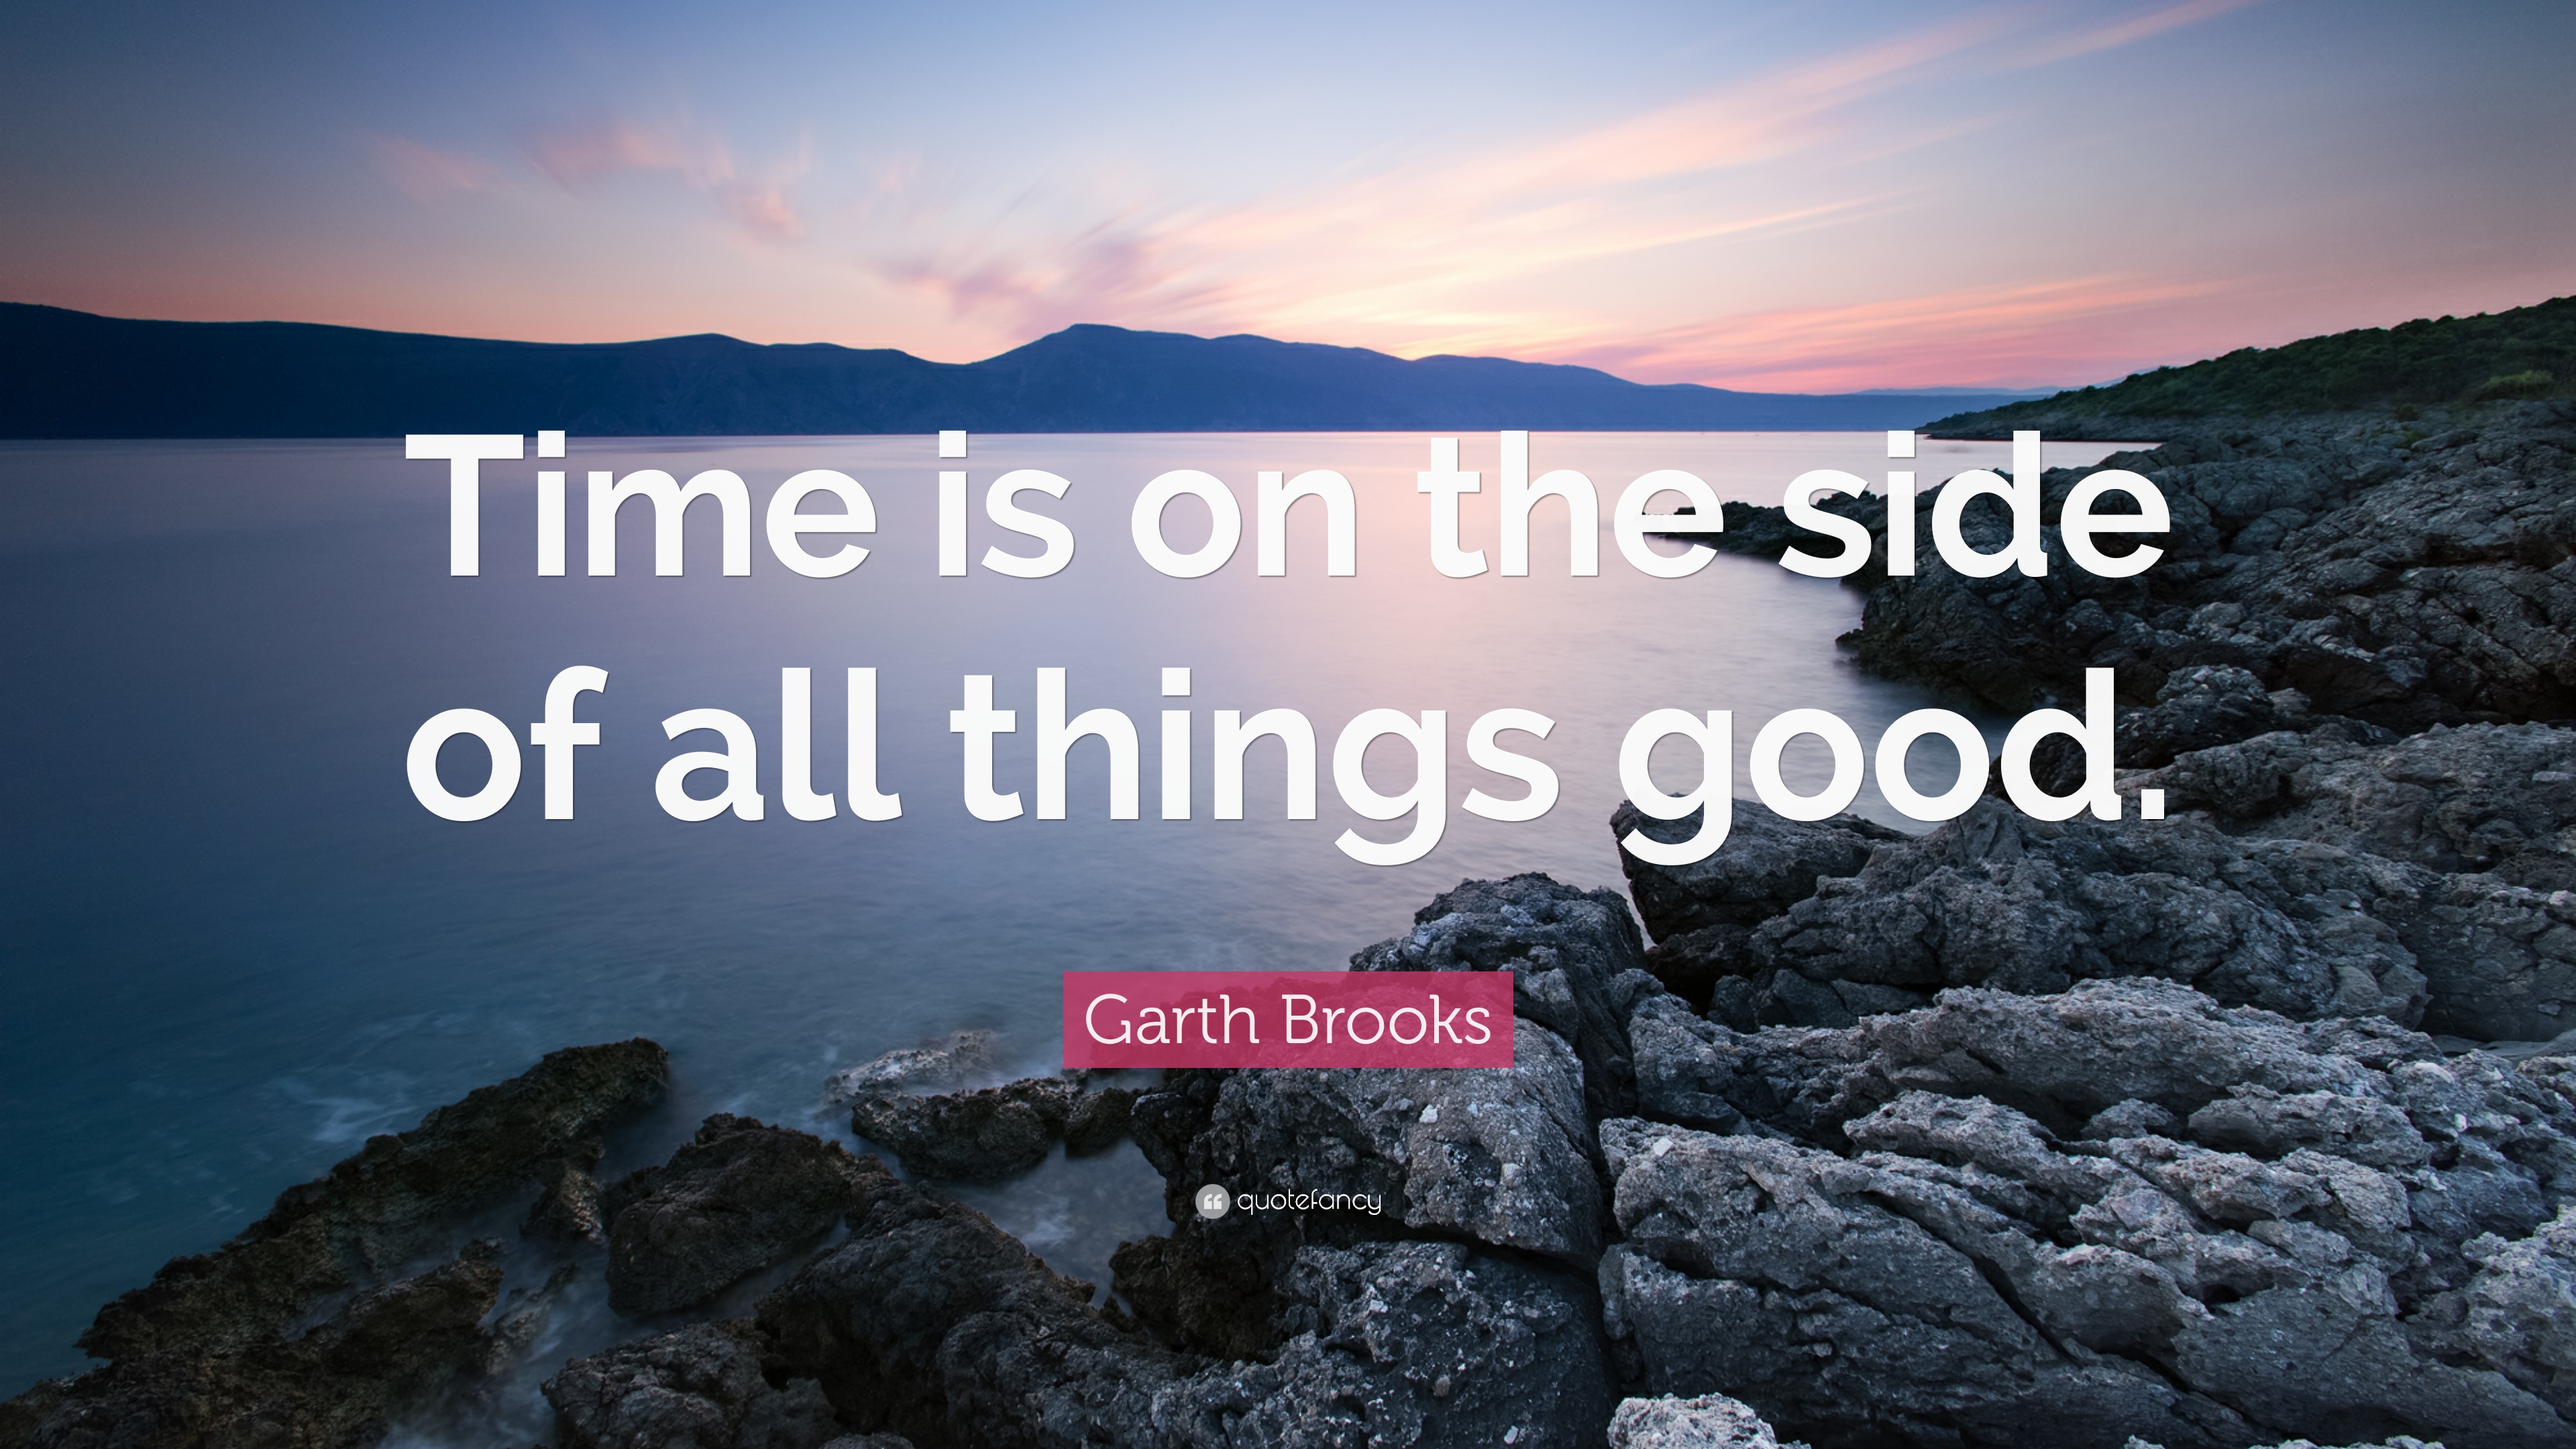 Garth Brooks Quote: “Time is on the side of all things good.” (7 ...